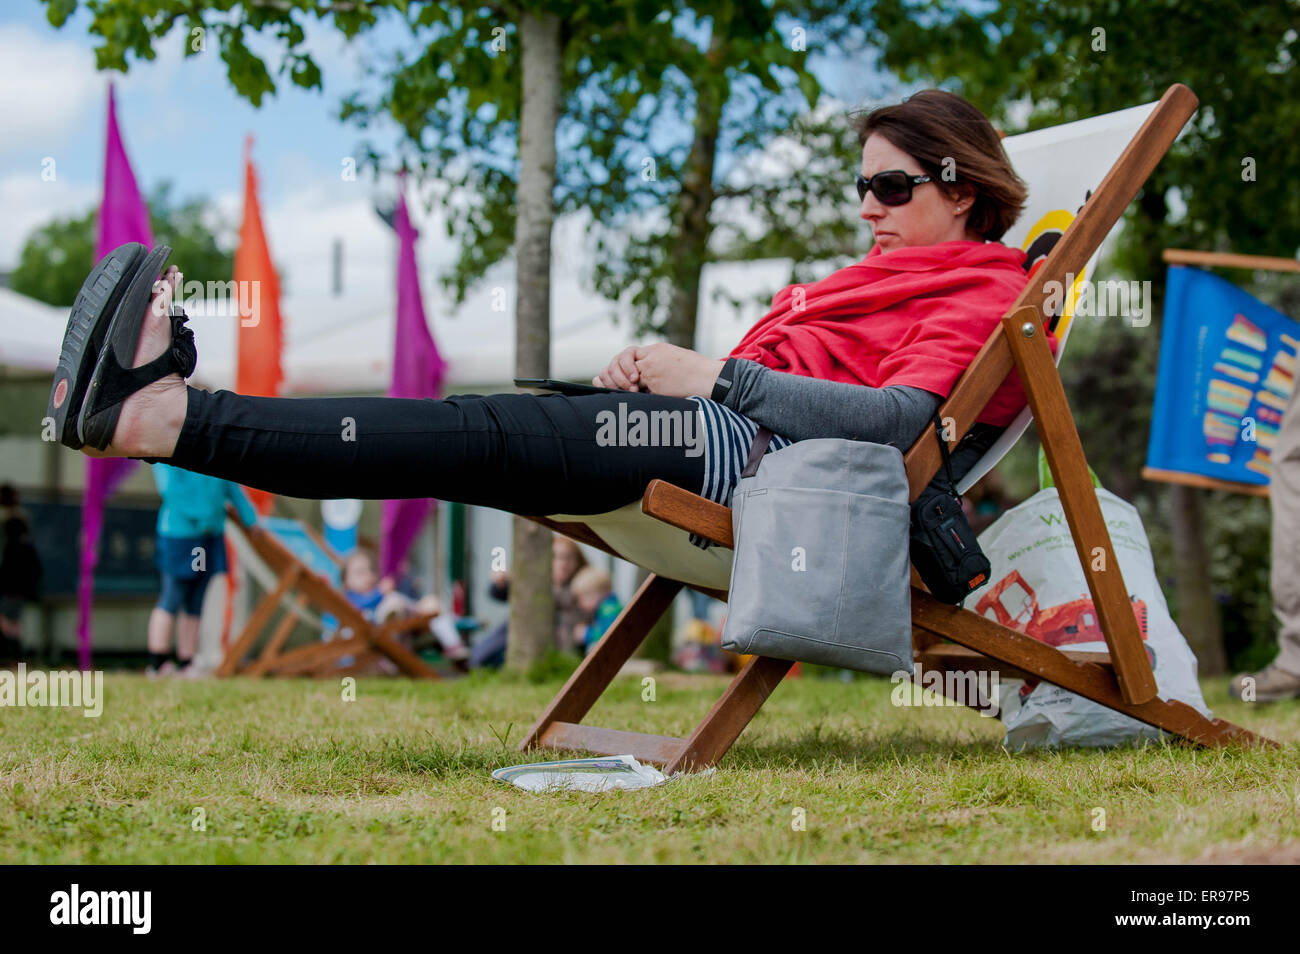 Hay on Wye, UK. Thursday 28 May 2015  Pictured: A woman relaxes in the Sun at the Hay Festival RE: The Hay Festival takes place in Hay on Wye, Powys, Wales Stock Photo